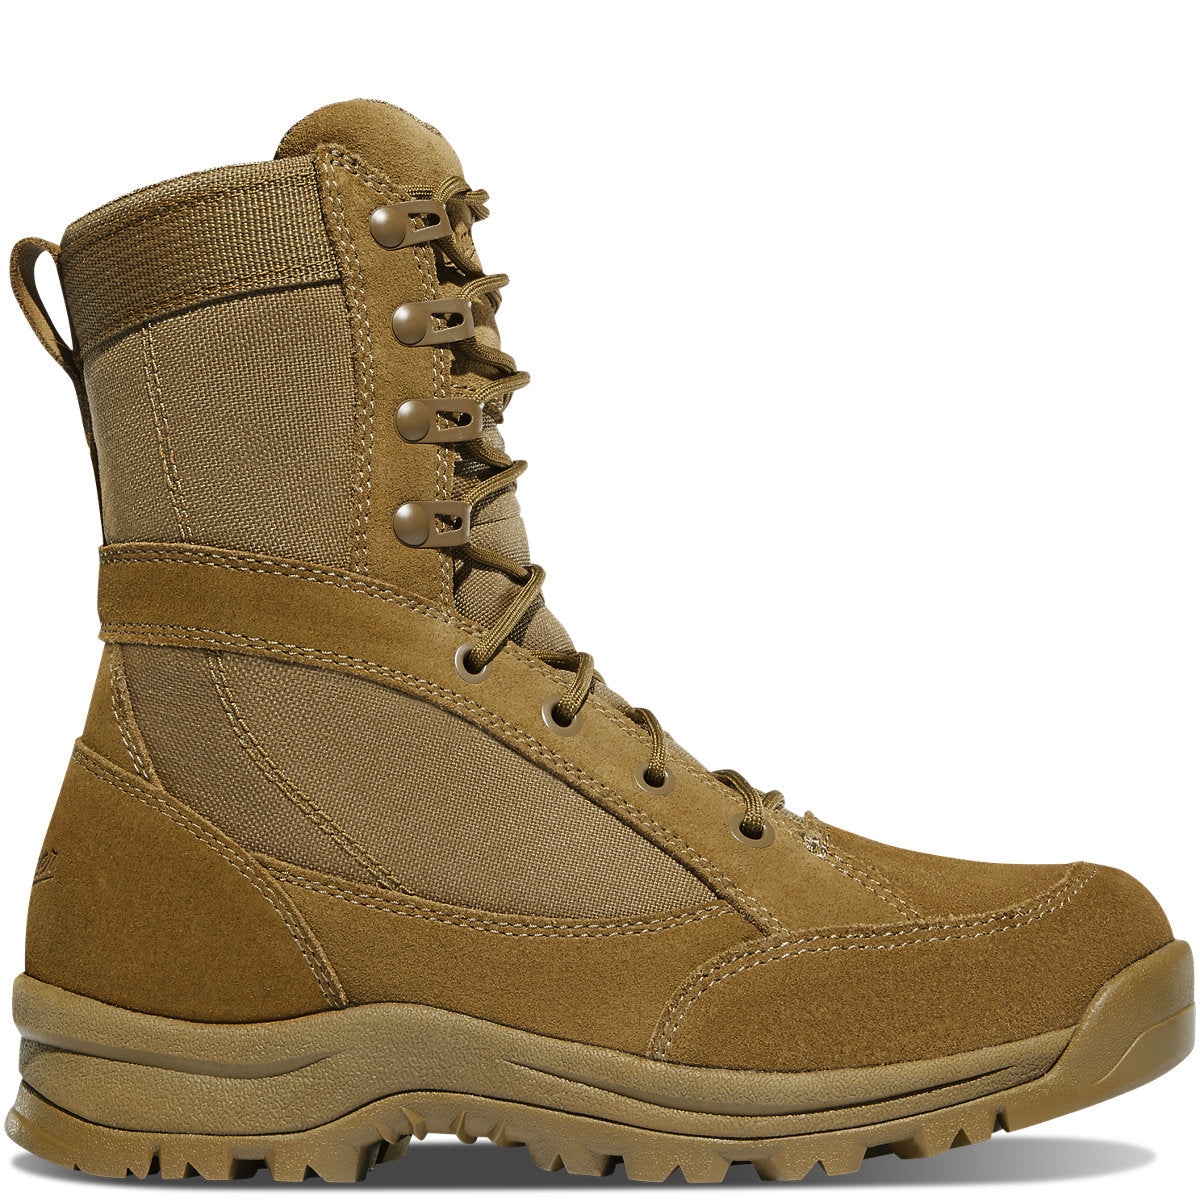 DANNER Women's Prowess 8" Coyote Hot Boot